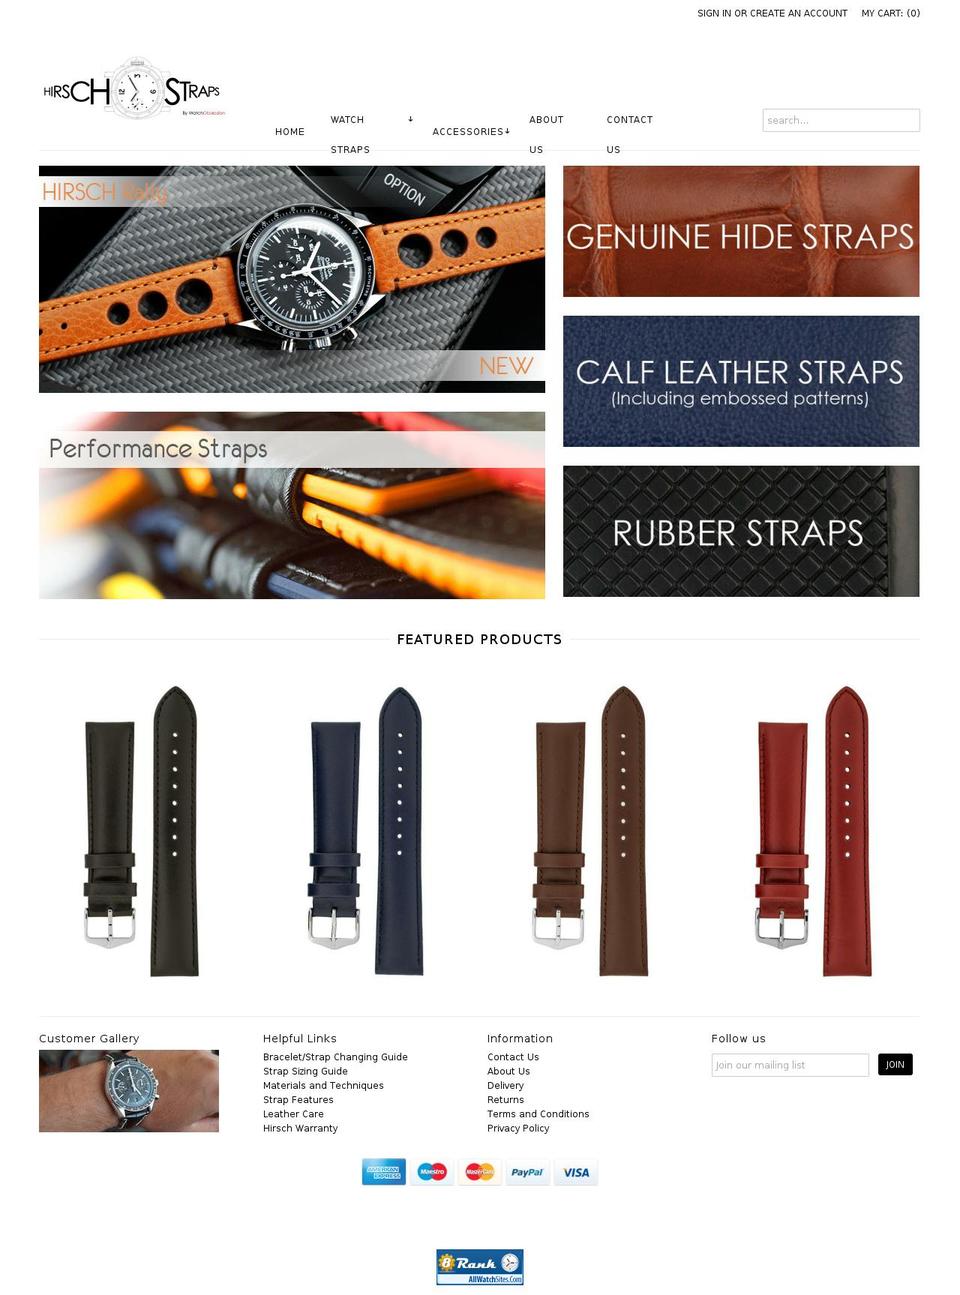 Boost Shopify theme site example hirschstraps.com